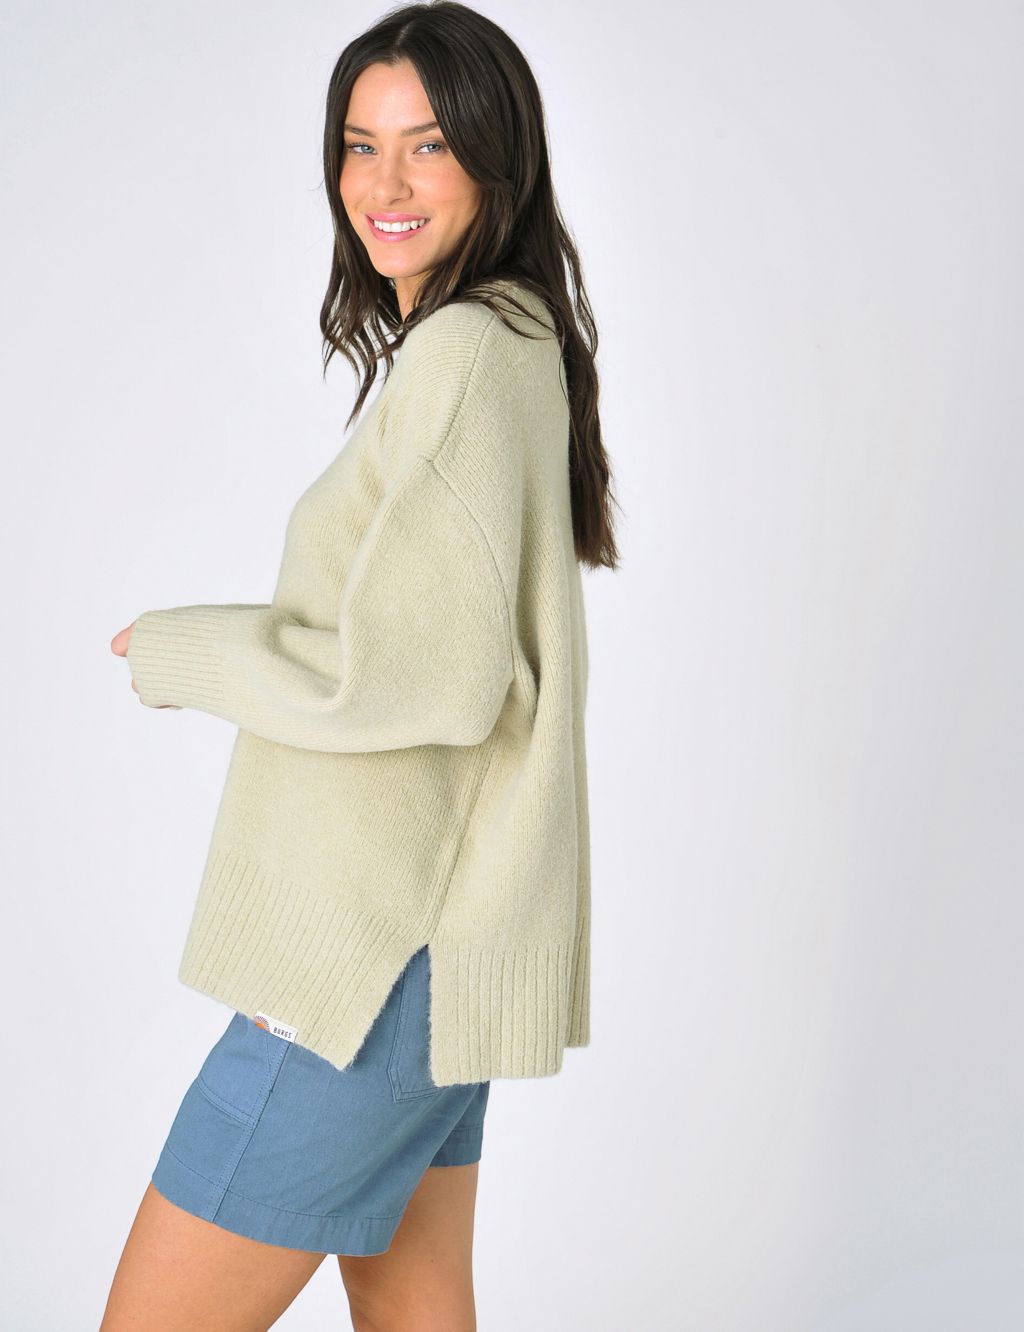 Crew Neck Relaxed Jumper with Wool image 1